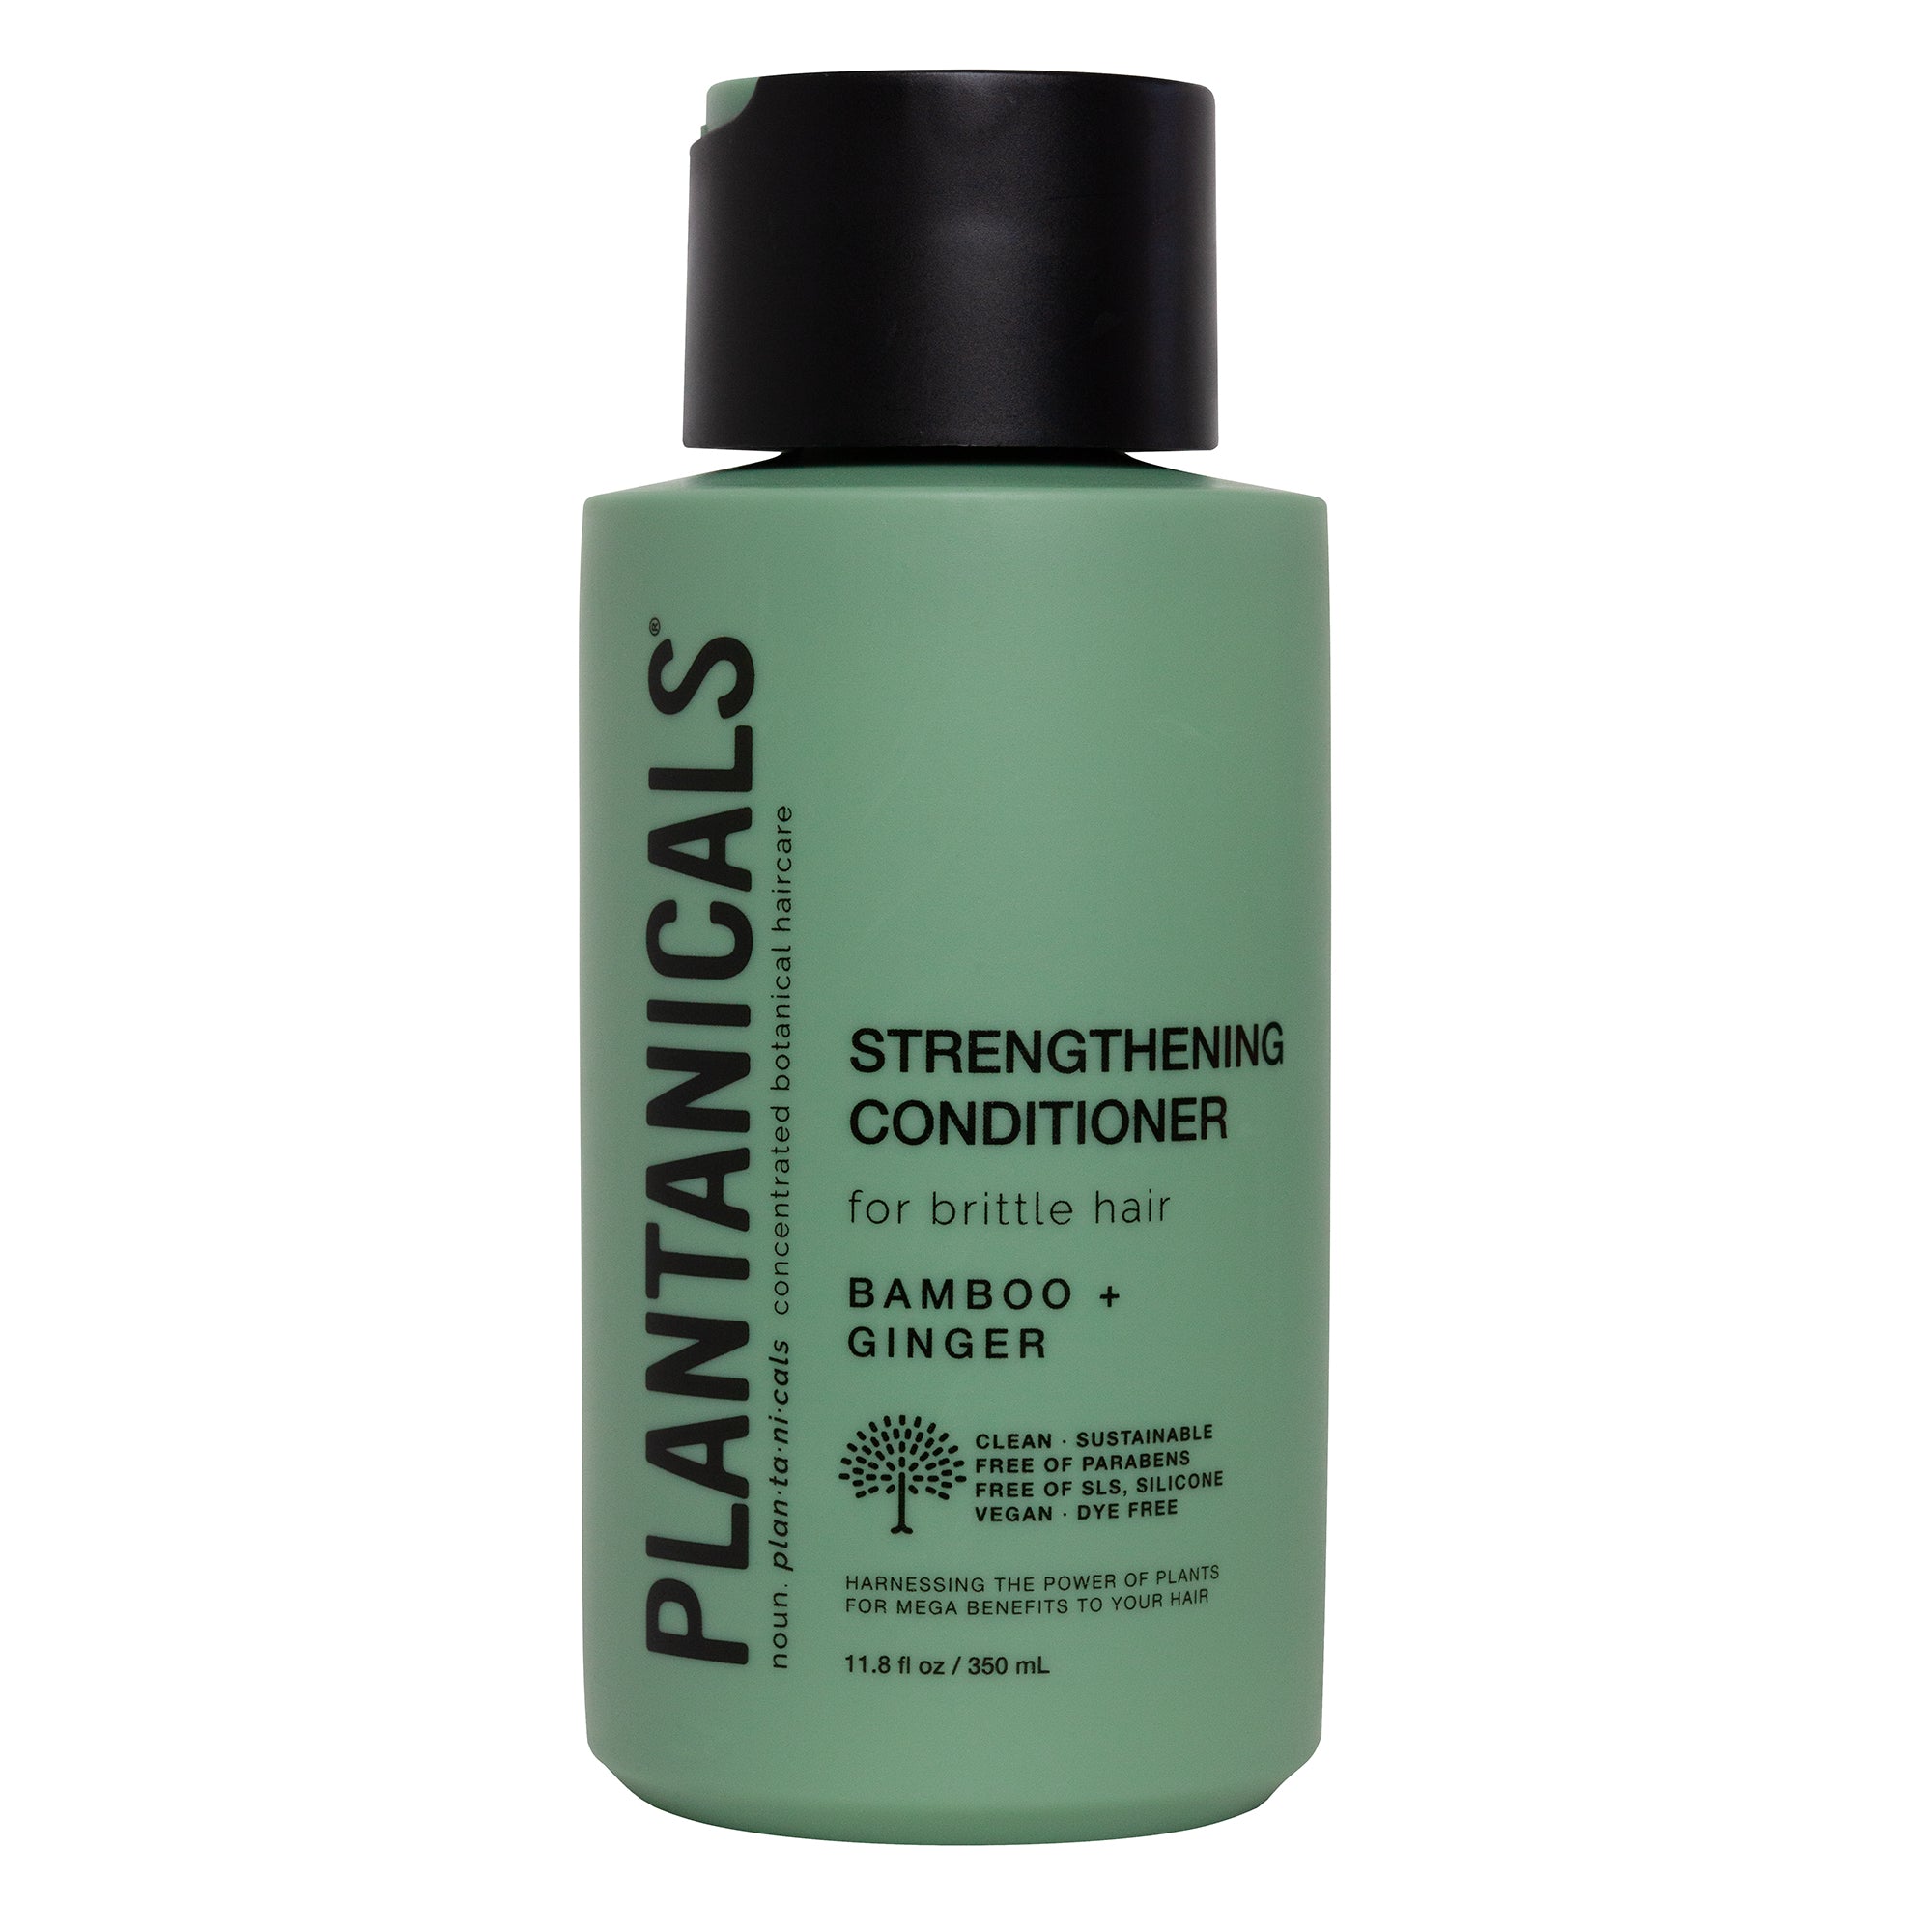 *New & Improved* Strengthening Conditioner